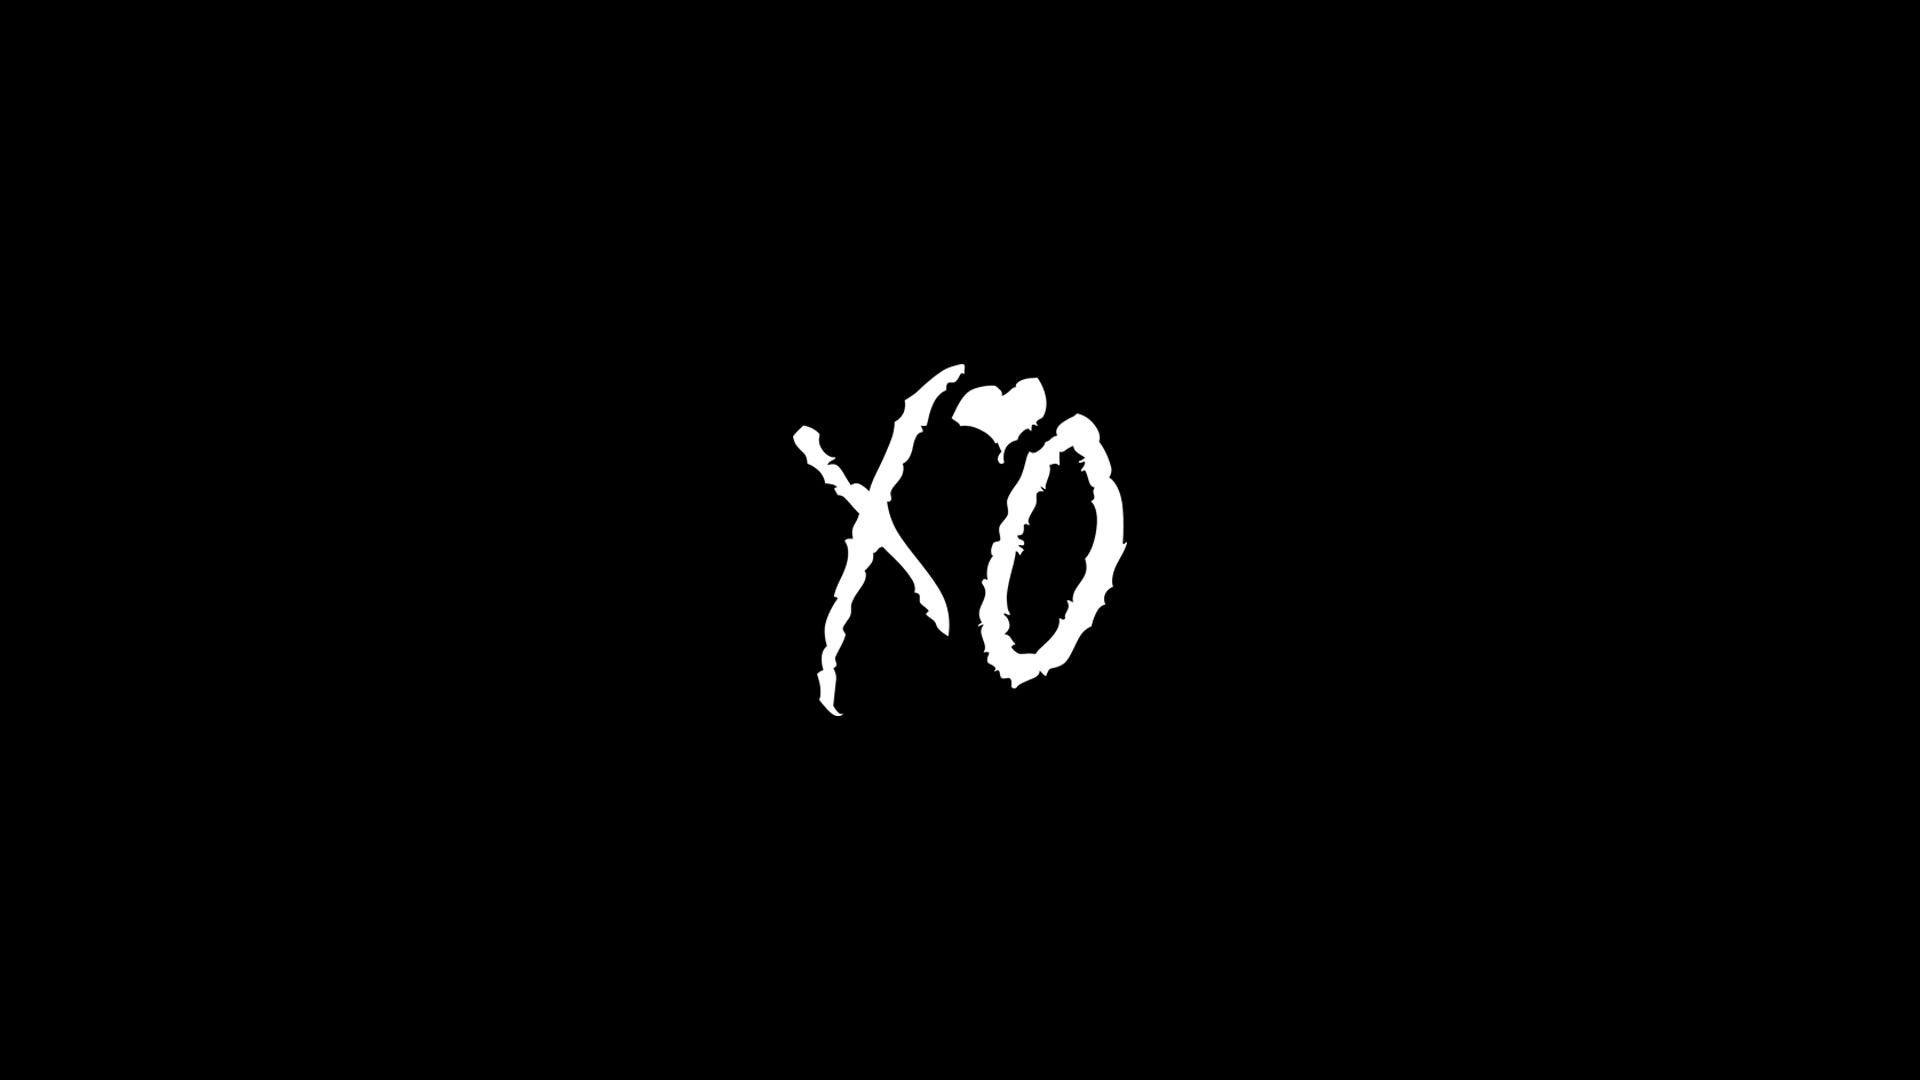 The Weeknd Xo Wallpapers - Top Free The